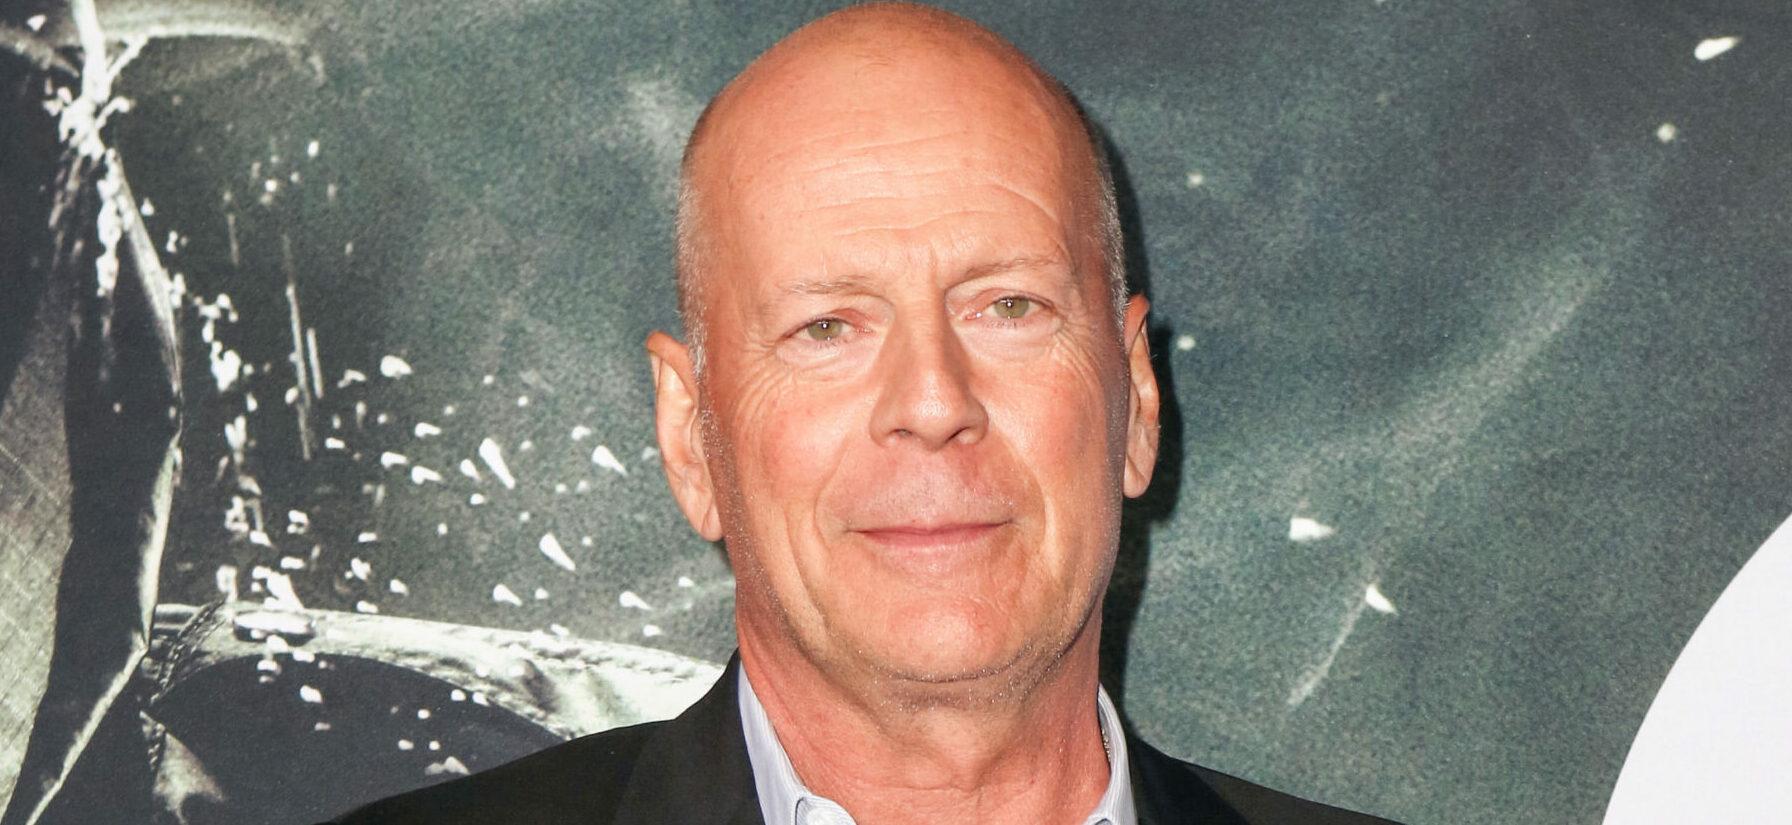 Bruce Willis Looks Somber During Rare Public Outing Amid Dementia Battle